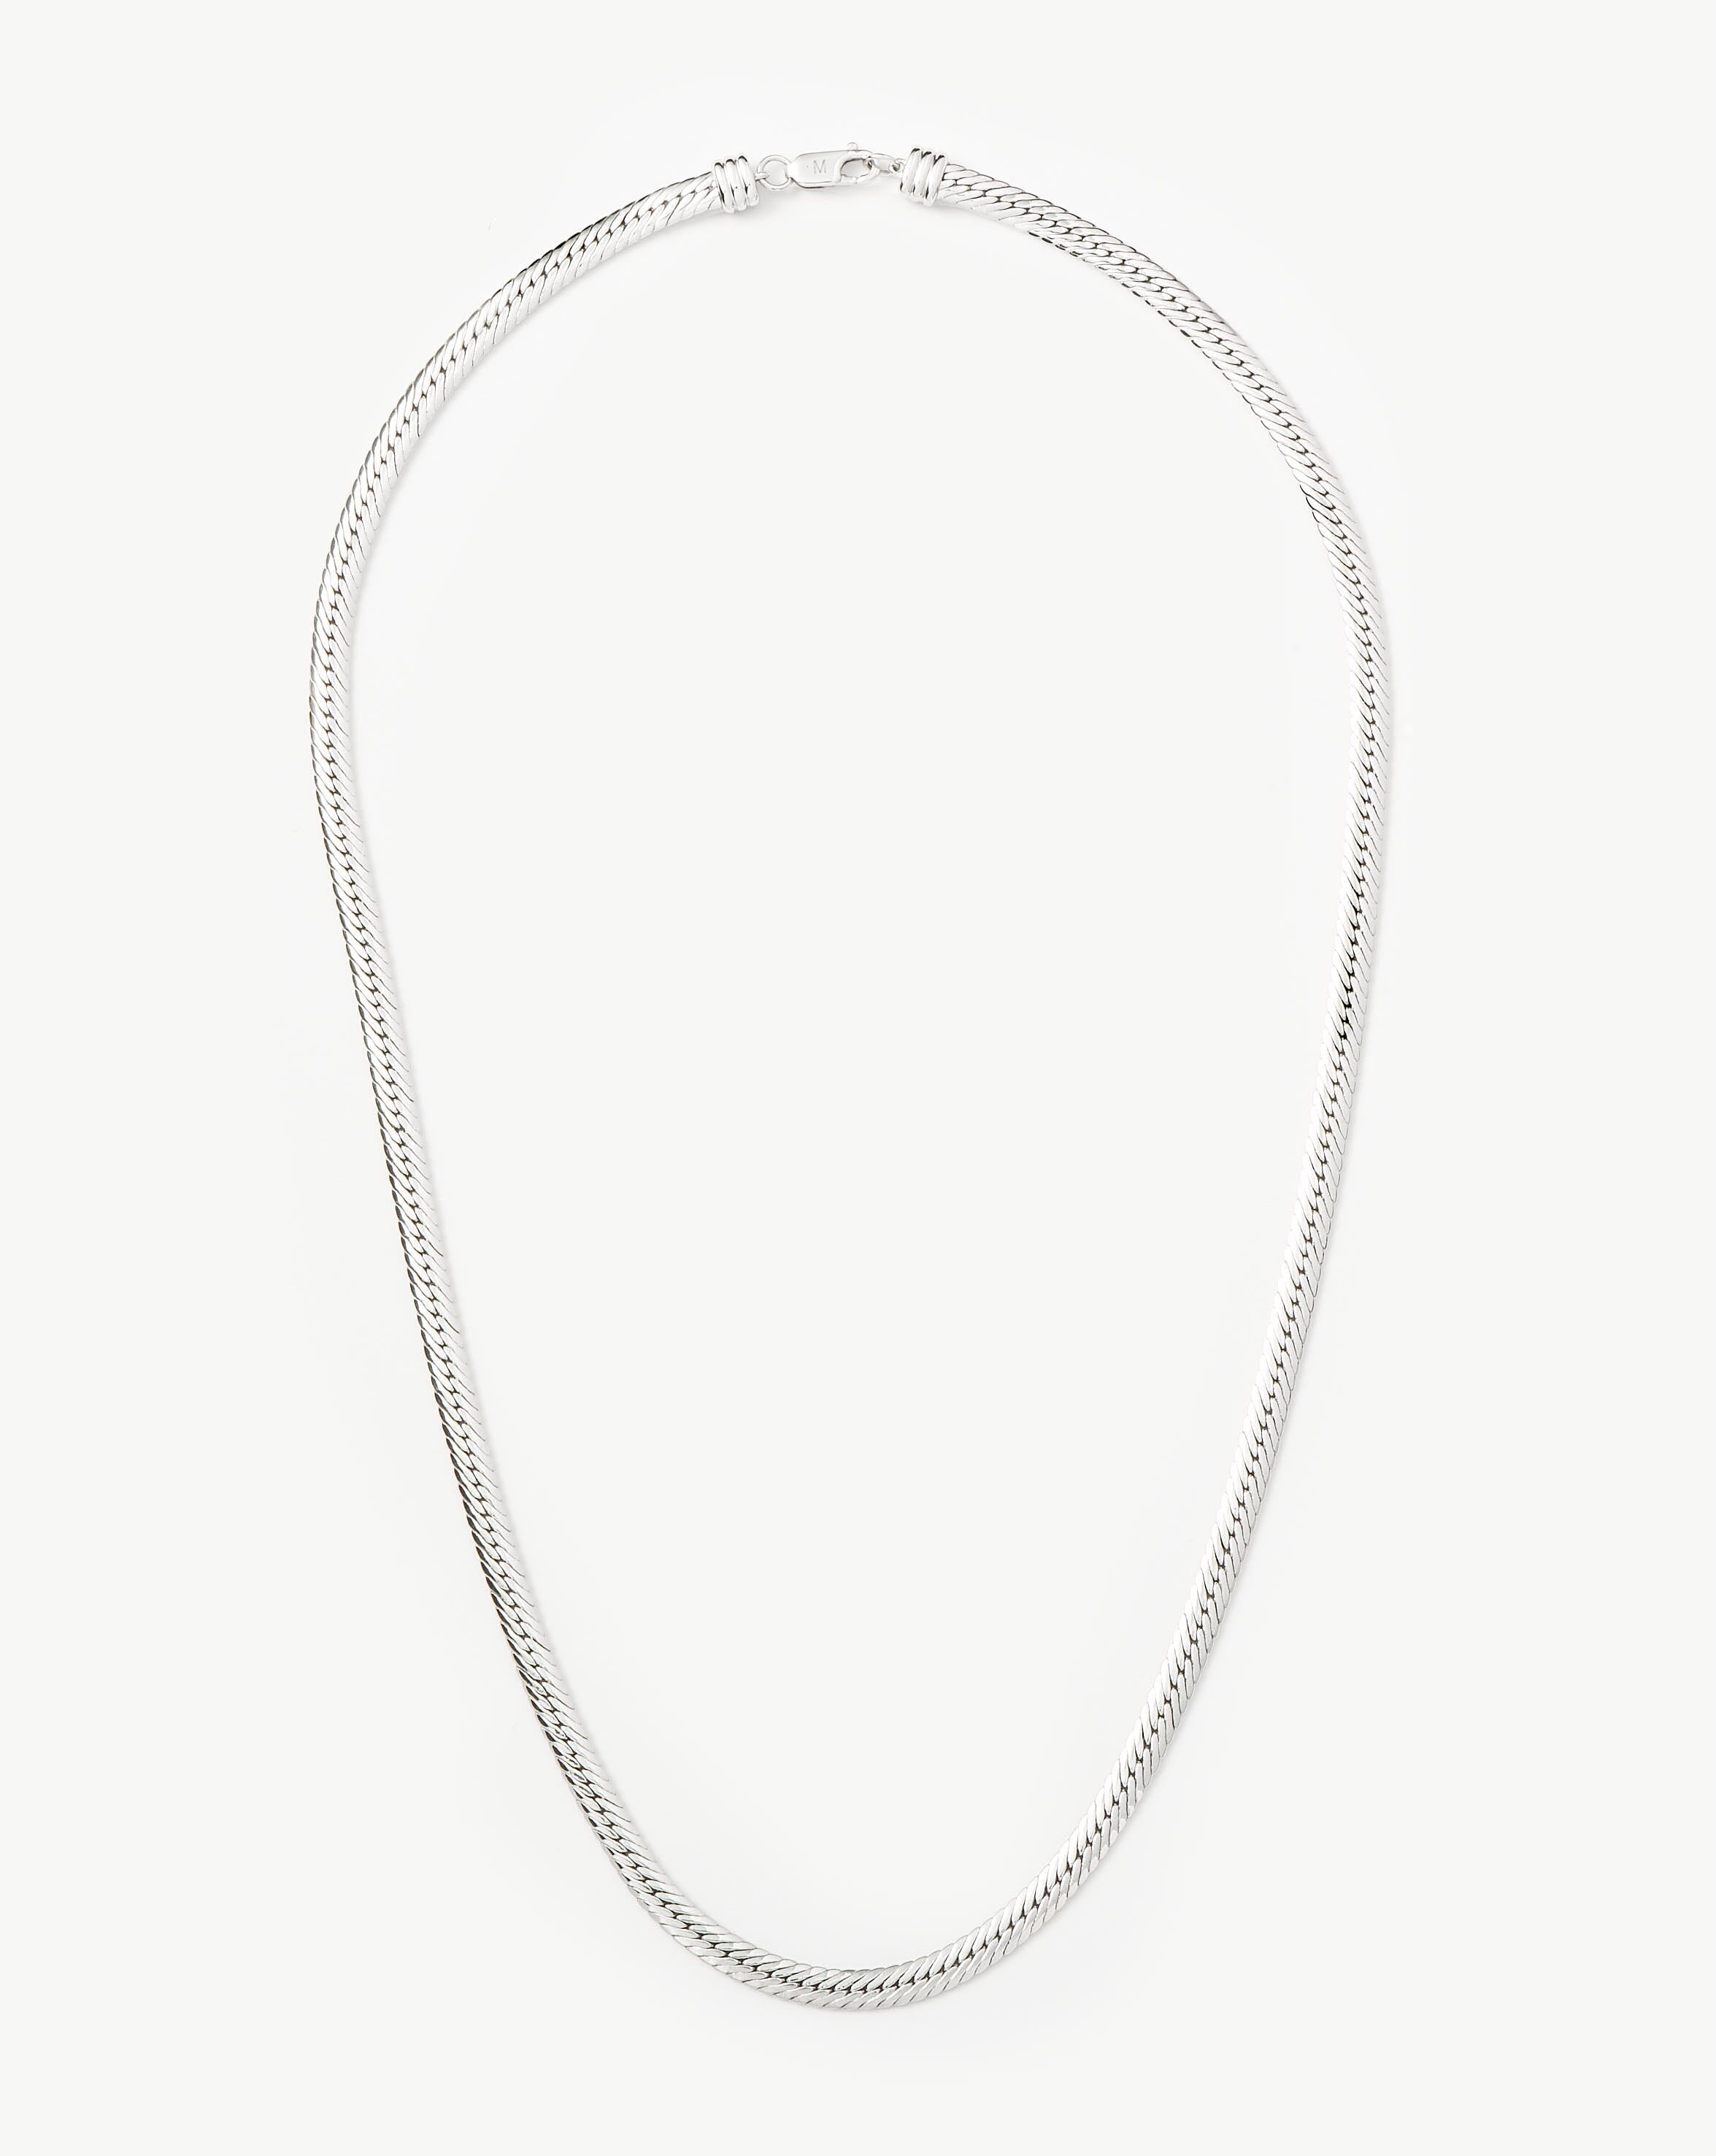 Chain - 3 mm Sterling Silver Large Snake-Style chain - 16 inches